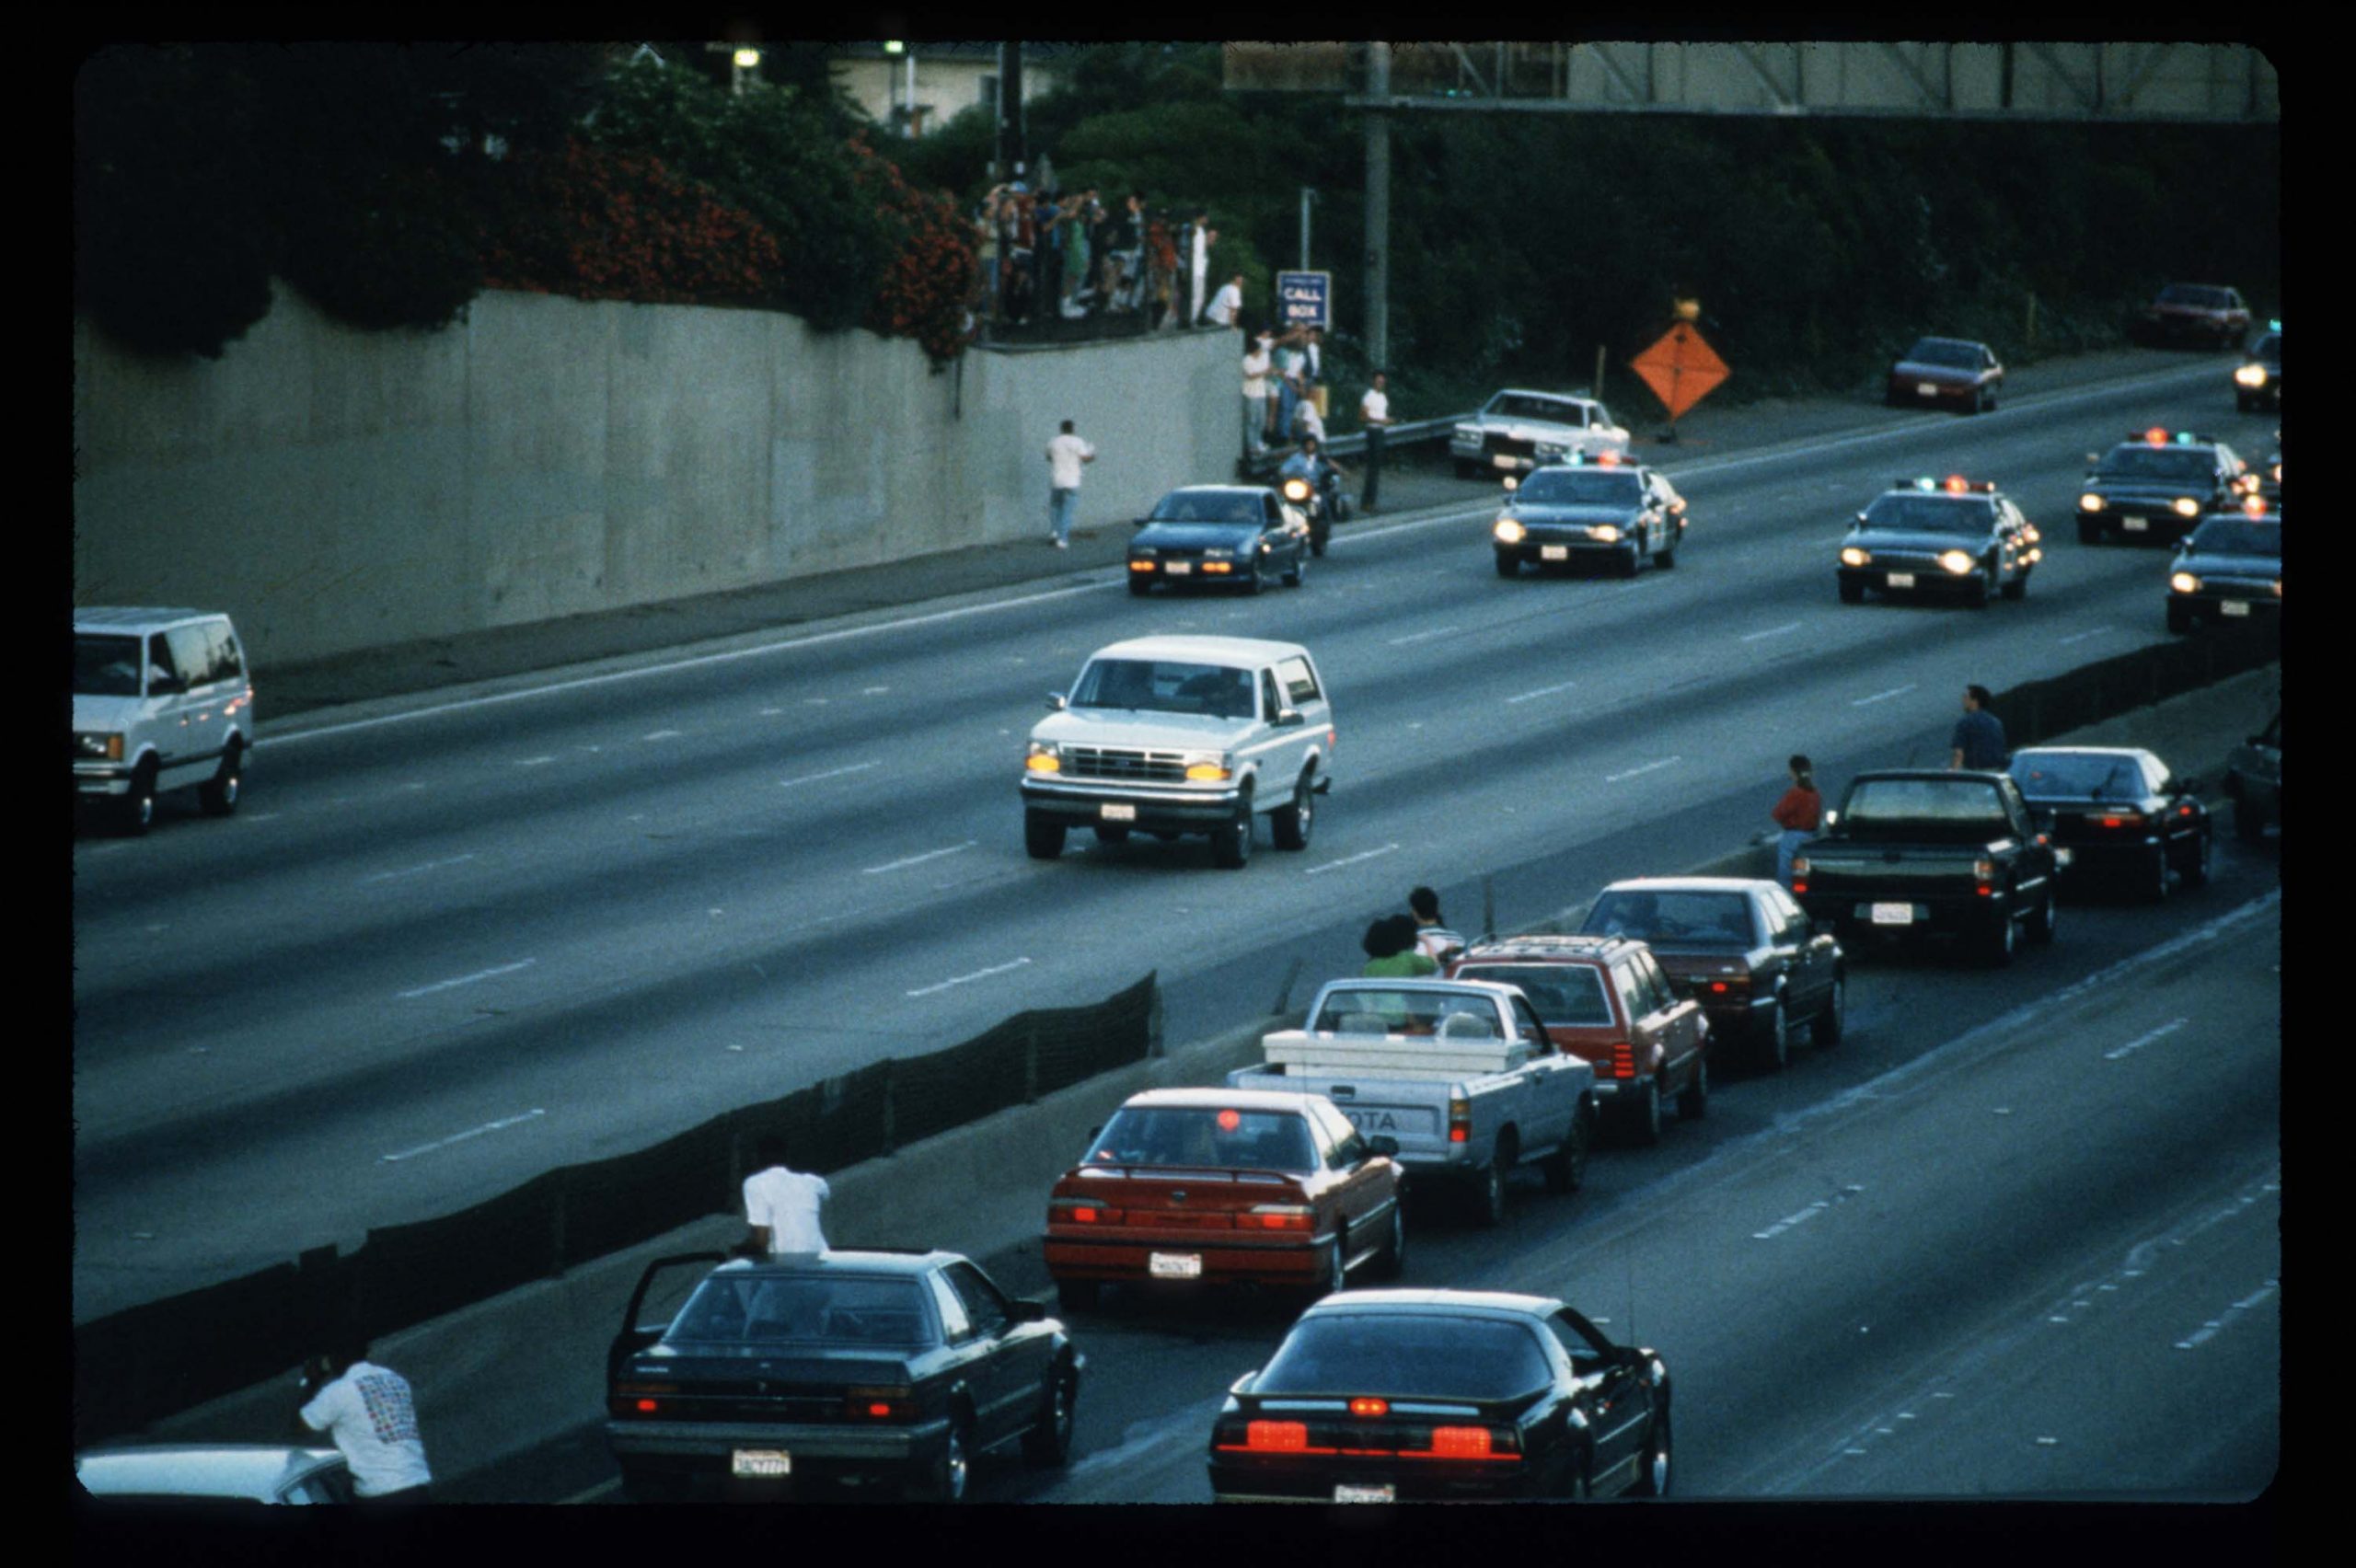 Motorists stop and wave as police cars pursue the Ford Bronco (white, R) driven by Al Cowlings, carrying fugitive murder suspect O.J. Simpson.